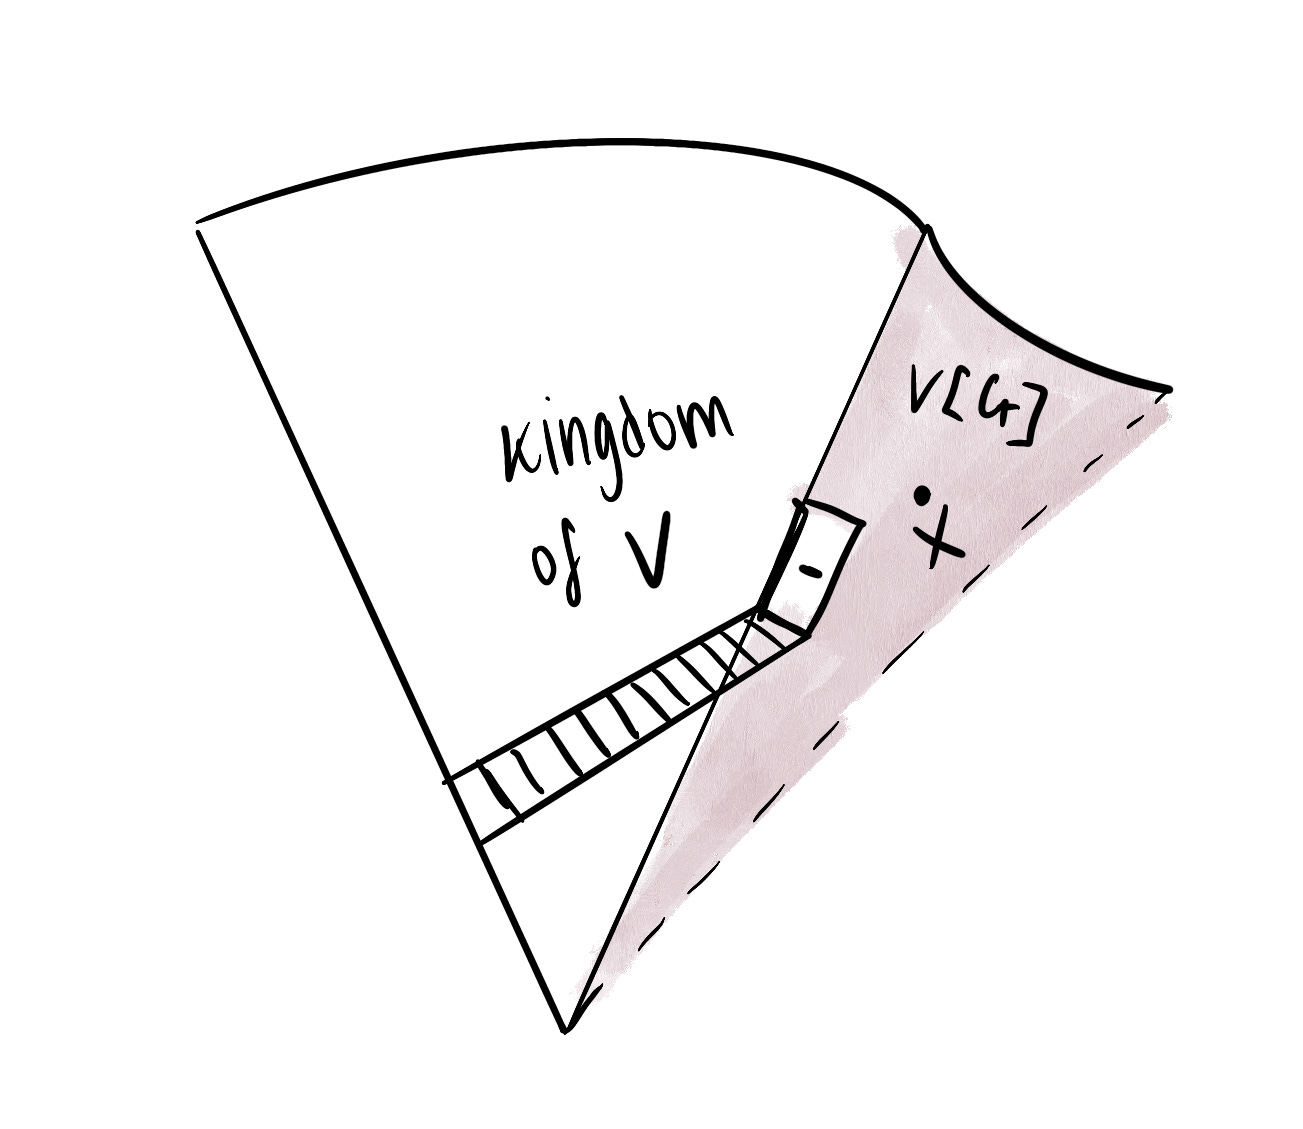 A depiction of the Kingdom of V, together with the ladder, the door leading to the room where X is found, and the Kingdom of V[G] that contains the room.